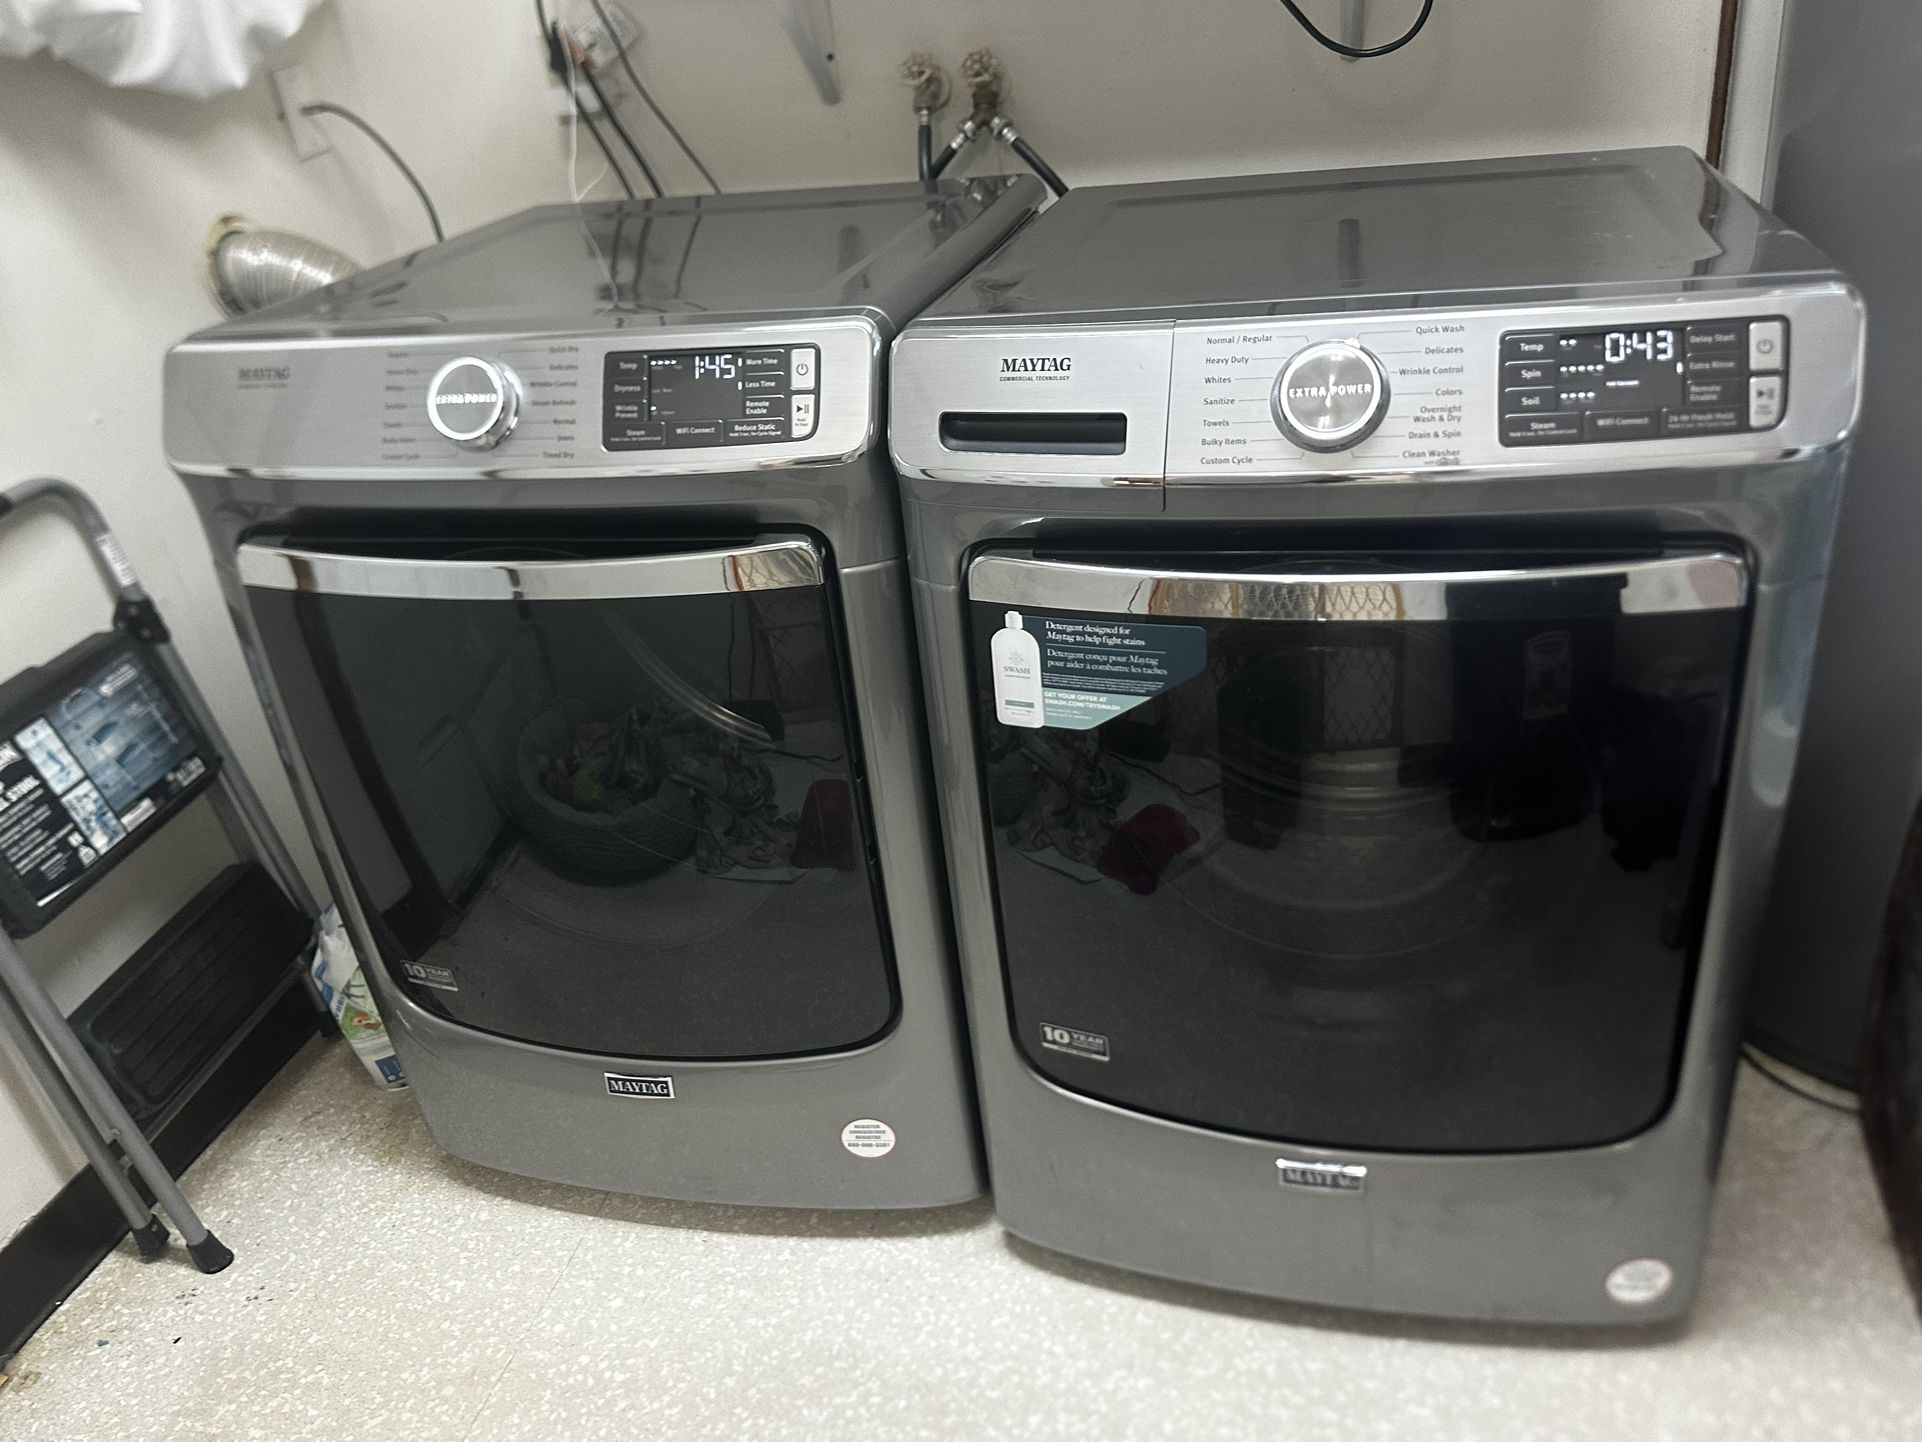 Maytag Washer And Dryer 